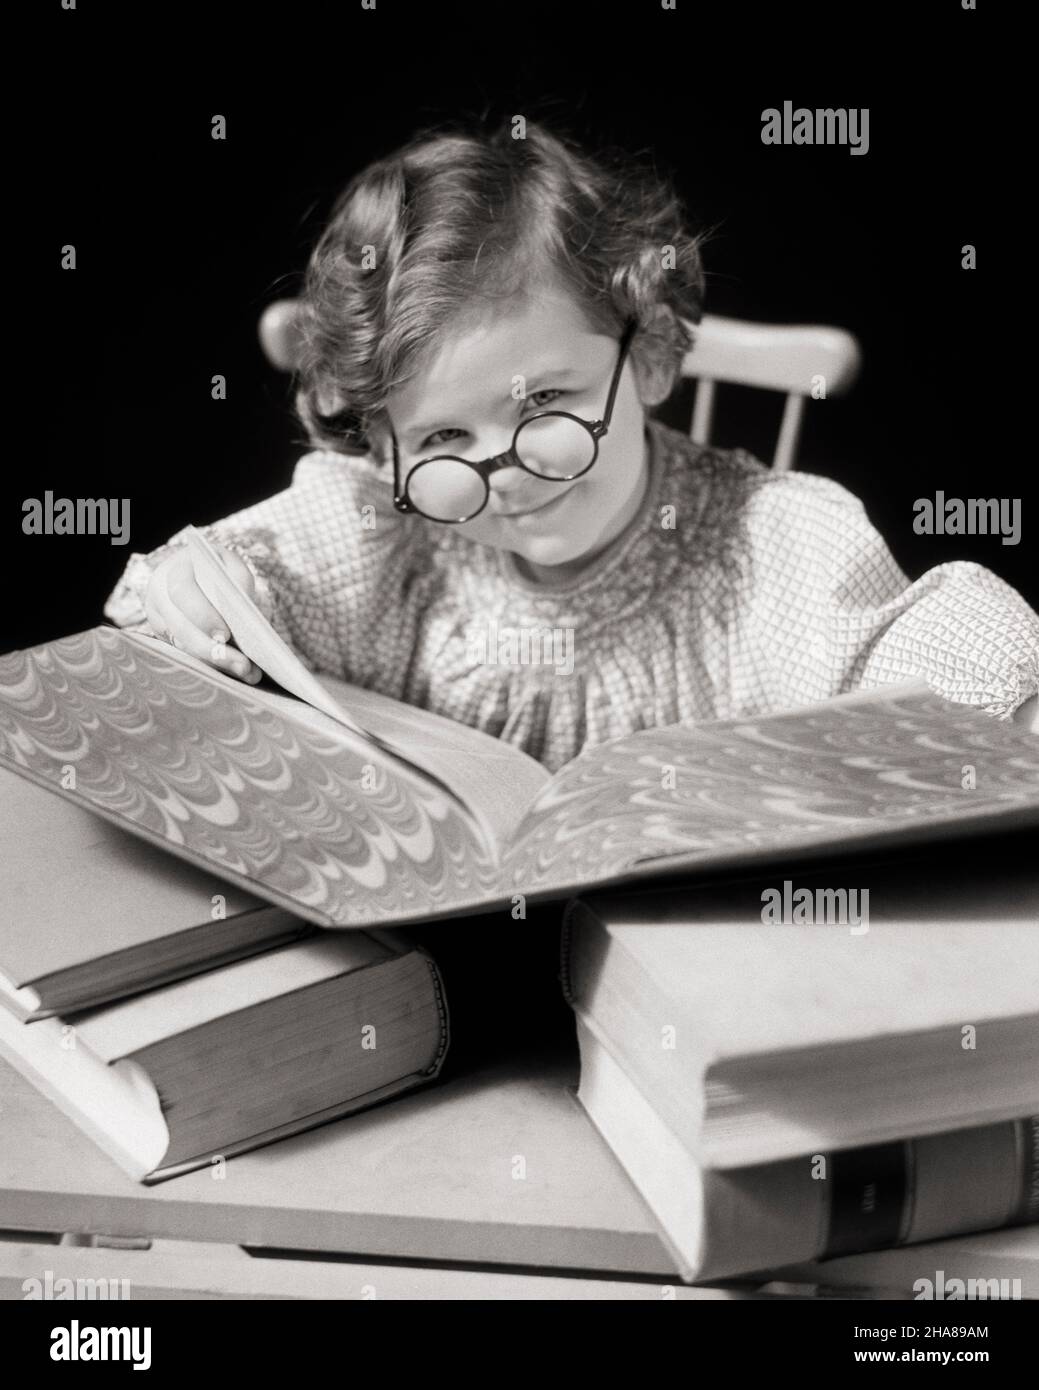 1930s LITTLE BRUNETTE GIRL SMILING READING USING A LARGE REFERENCE BOOK WEARING SCHOLARLY ROUND EYEGLASSES AND LOOKING AT CAMERA - j5098 HAR001 HARS HOME LIFE COPY SPACE CHARACTER CONFIDENCE EYEGLASSES B&W EYE CONTACT BRUNETTE SCHOOLS SUCCESS DREAMS GRADE REFERENCE HEAD AND SHOULDERS CHEERFUL DISCOVERY AND INTELLIGENT KNOWLEDGE PRIDE ACADEMIC OPPORTUNITY OCCUPATIONS PRIMARY SMILES USING JOYFUL PLEASANT SCHOLARLY SMART AGREEABLE CHARMING GRADE SCHOOL GROWTH JUVENILES LOVABLE PLEASING STUDIOUS ADORABLE APPEALING BLACK AND WHITE CAUCASIAN ETHNICITY HAR001 INQUISITIVE OLD FASHIONED Stock Photo